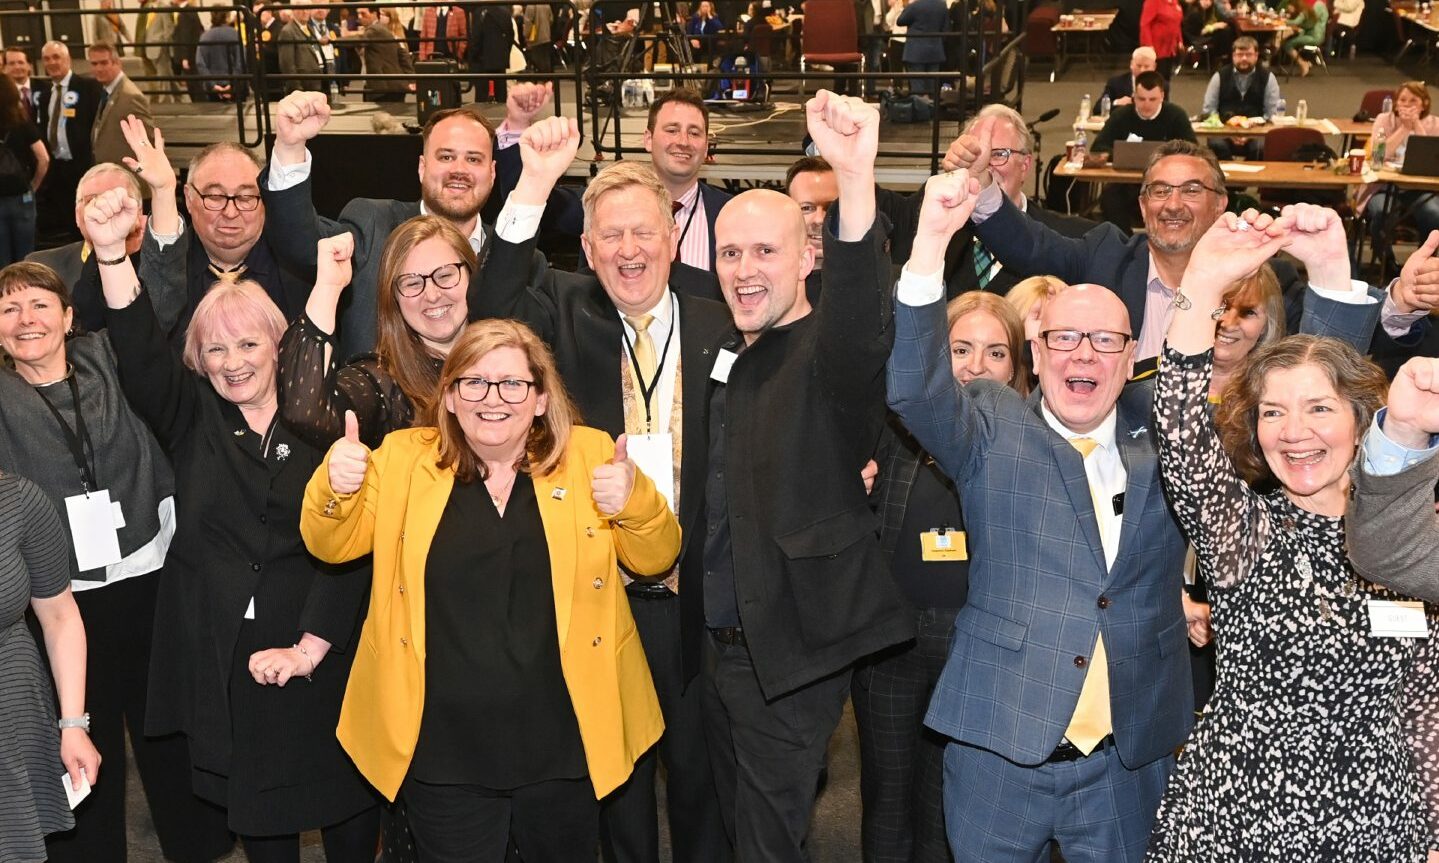 Aberdeen City Council's record-breaking SNP group celebrating with party colleagues at P&J Live. Their weekend quickly moved on to leadership and coalition talks. Picture by Scott Baxter/DCT Media.